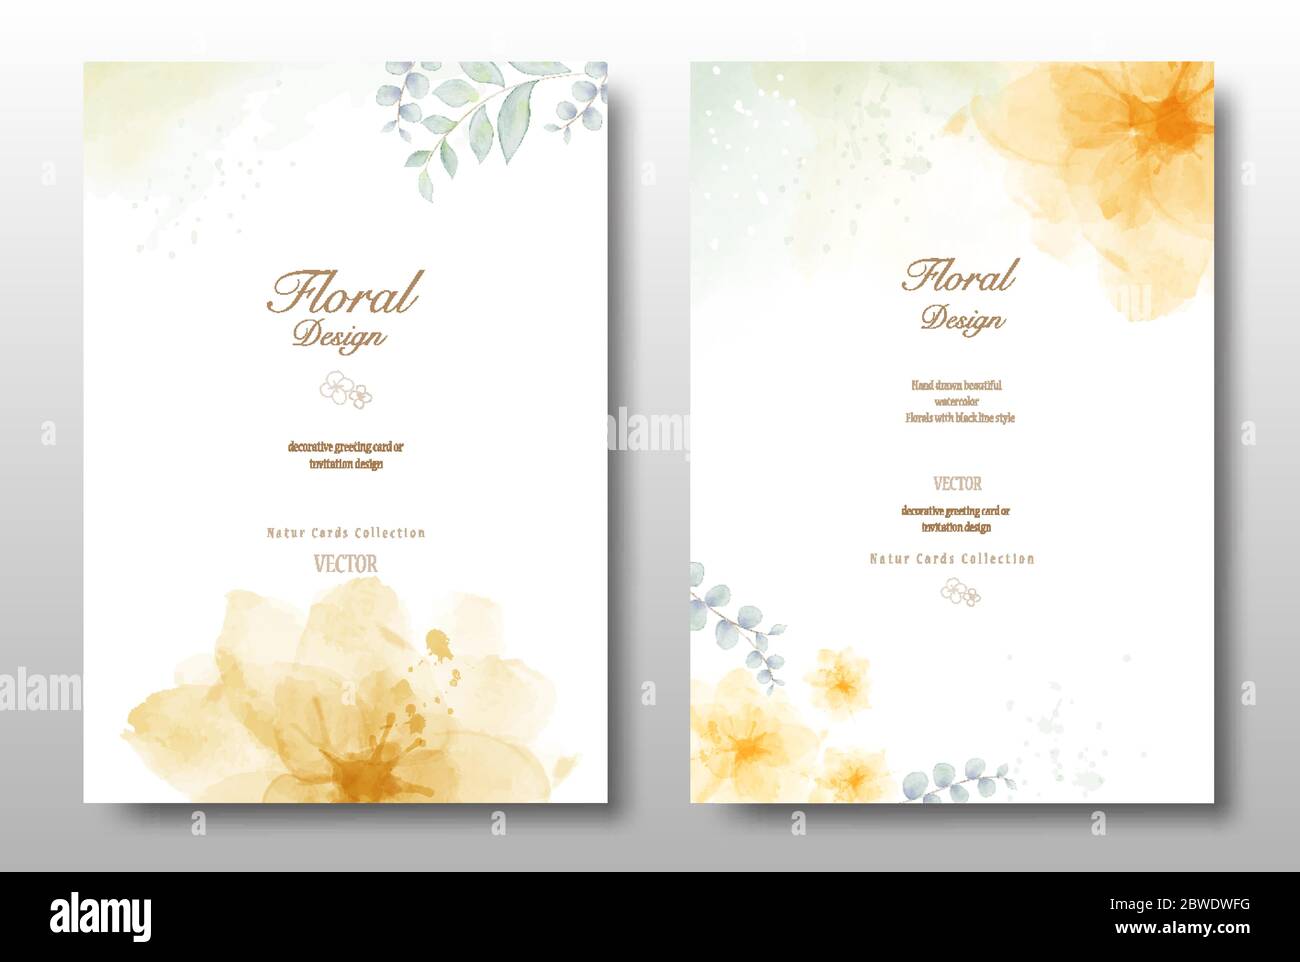 Watercolor hand painted invitation template card. Beautiful foliage background use for wedding, invitation, posters, banners, save the date, website, Stock Vector